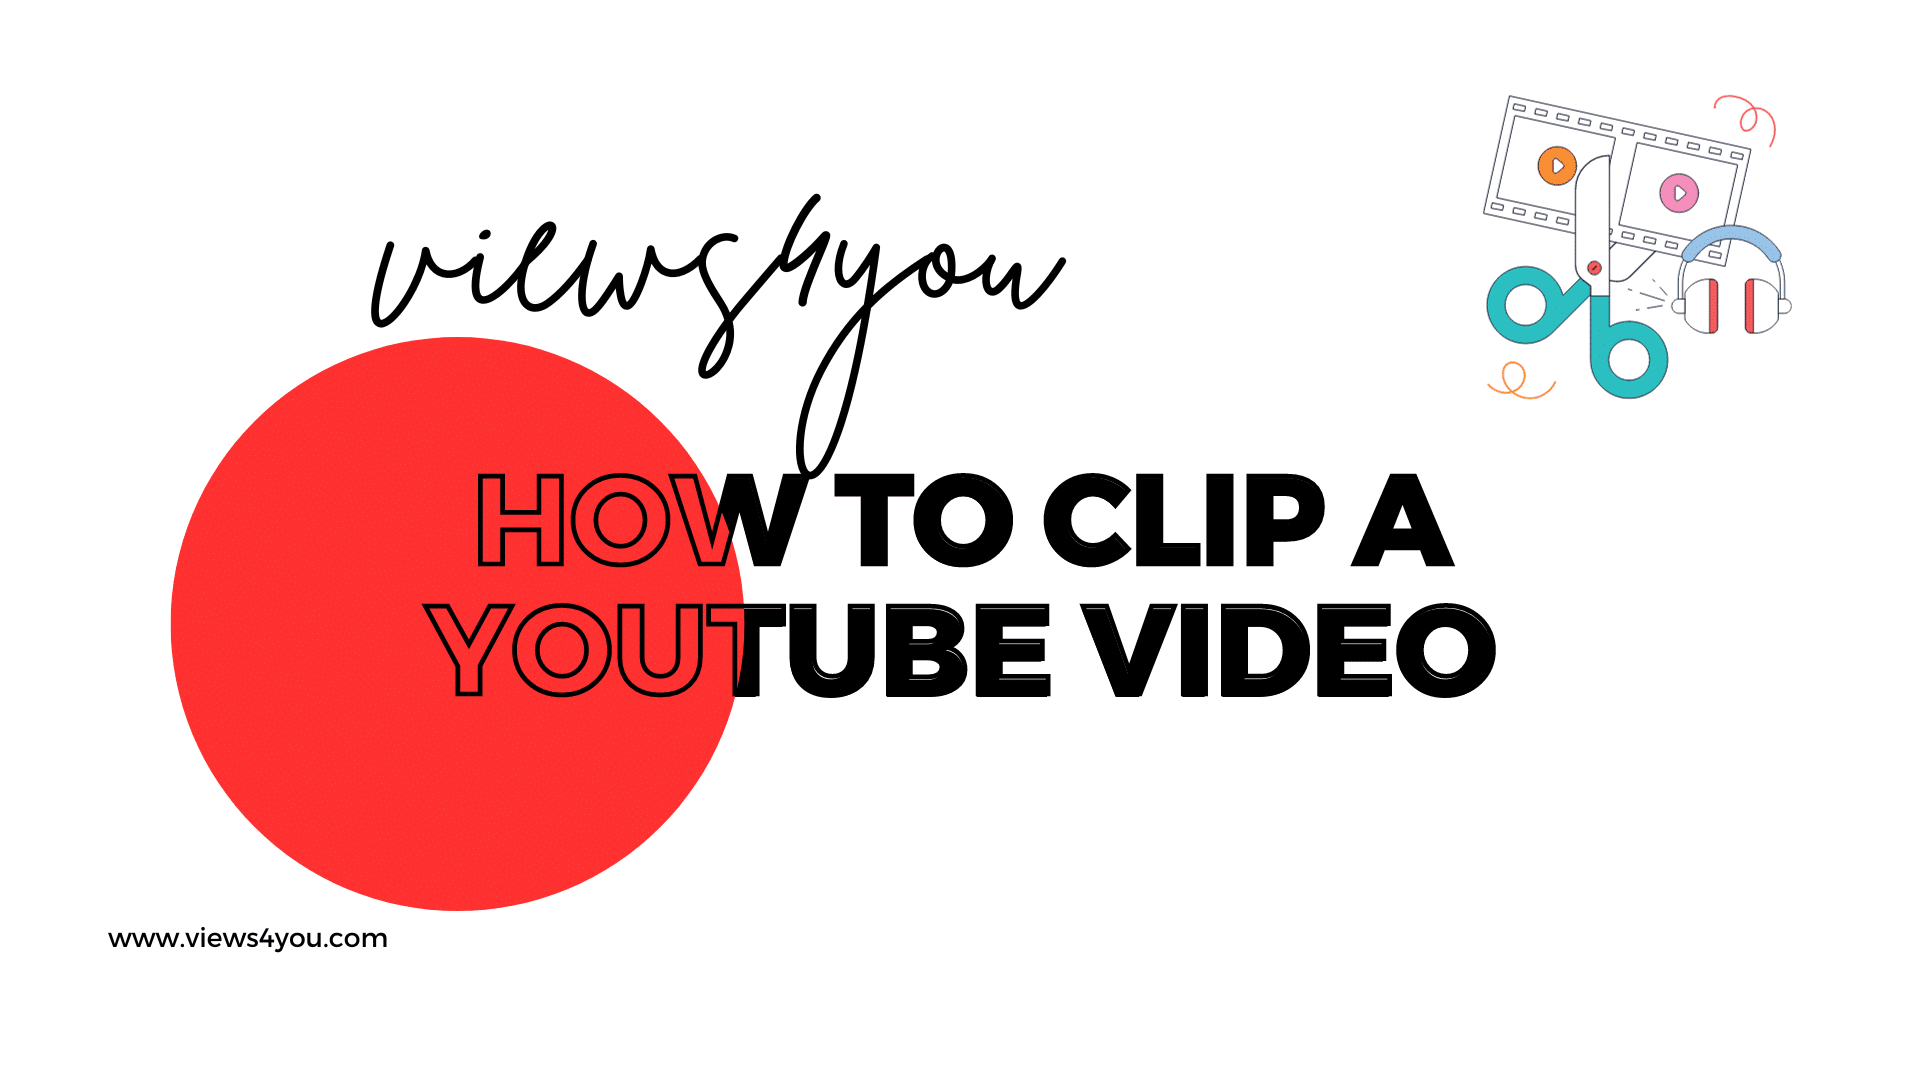 Learn how to clip YouTube videos.